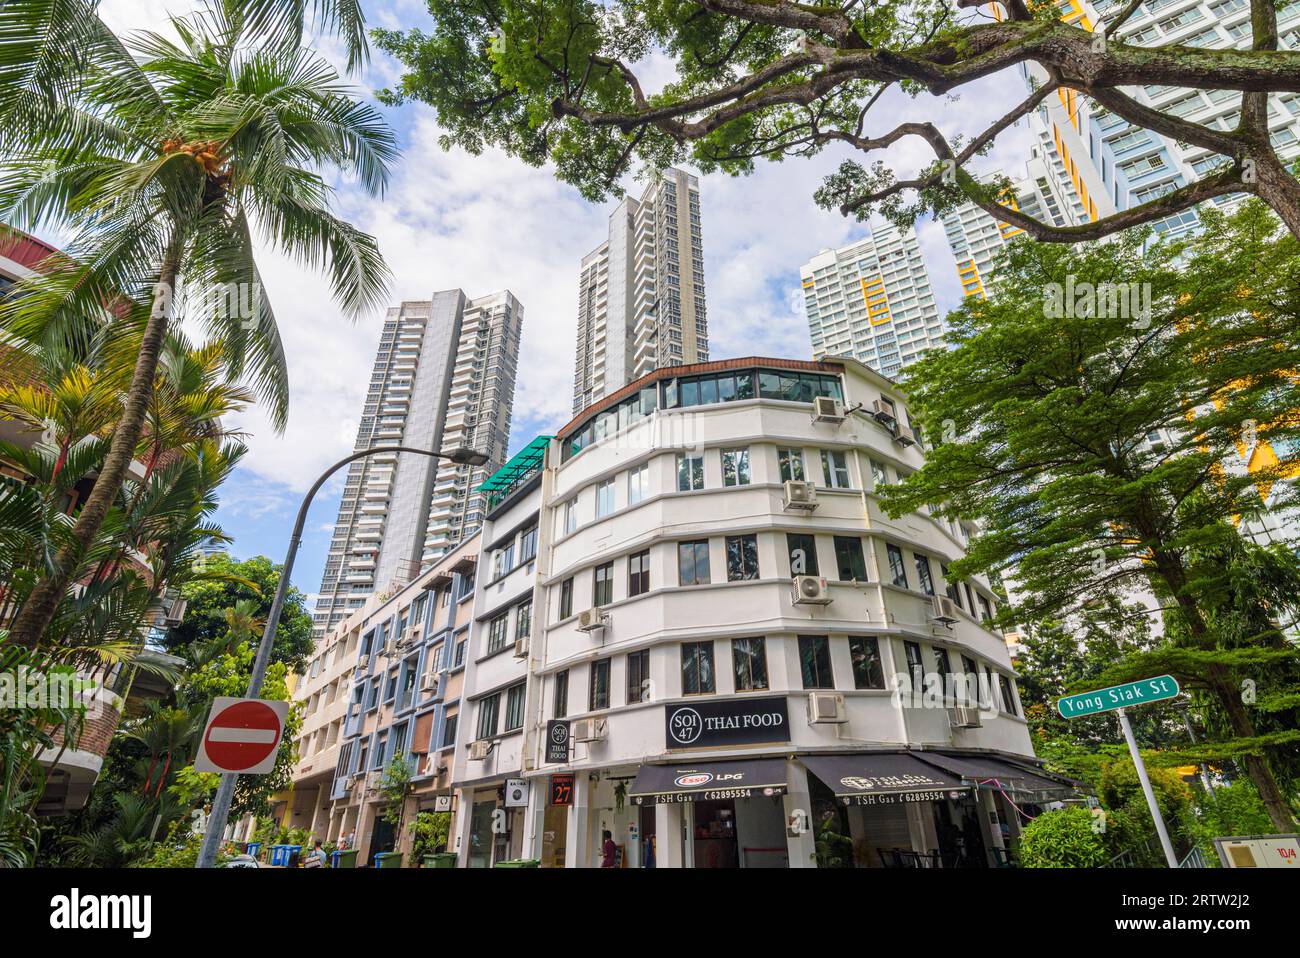 Old and new flats in the Tiong Bahru Estate, Singapore Stock Photo